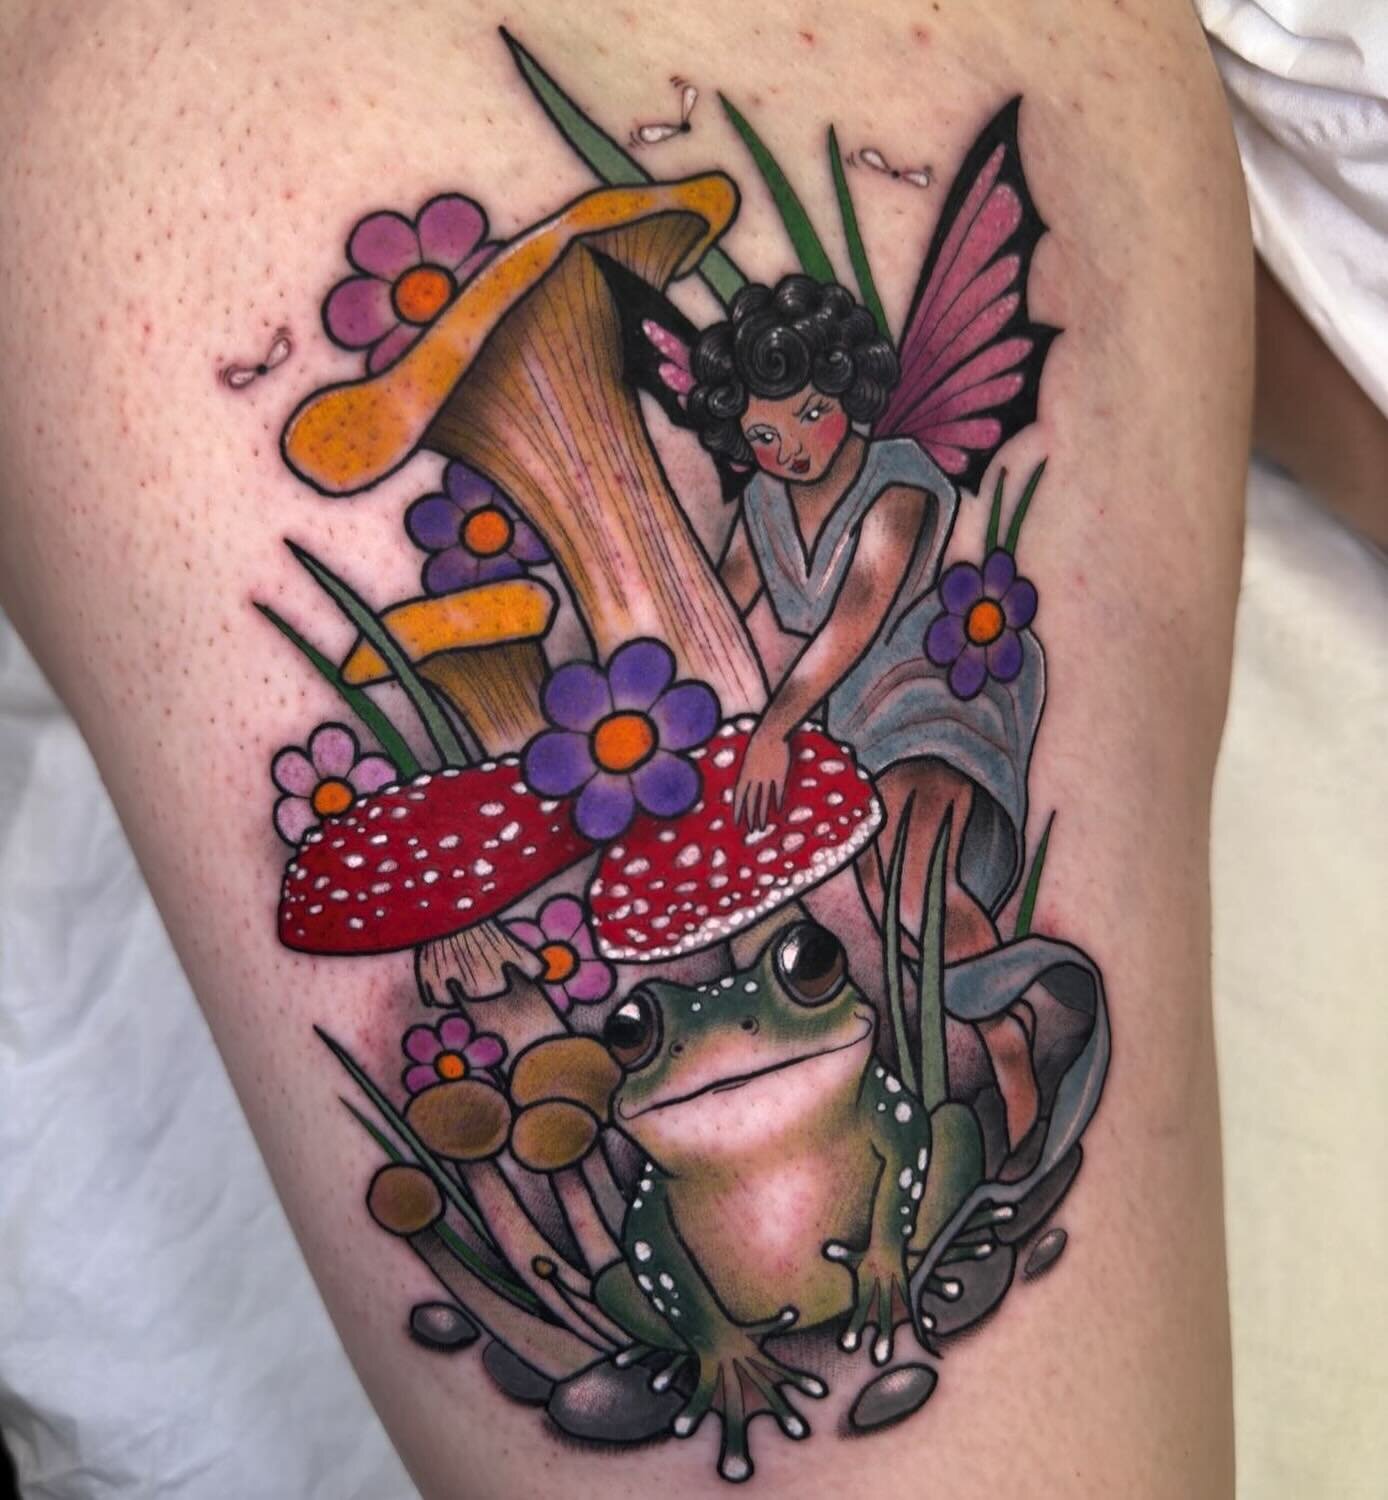 Toad, mushrooms and faerie, what more could you need in a tattoo? 🍄 
Done by the magical @paulacastletattoos ✨

#fantasytattoo #faerietattoo #toadstooltattoo #toadtattoo #neotrad #neotraduk